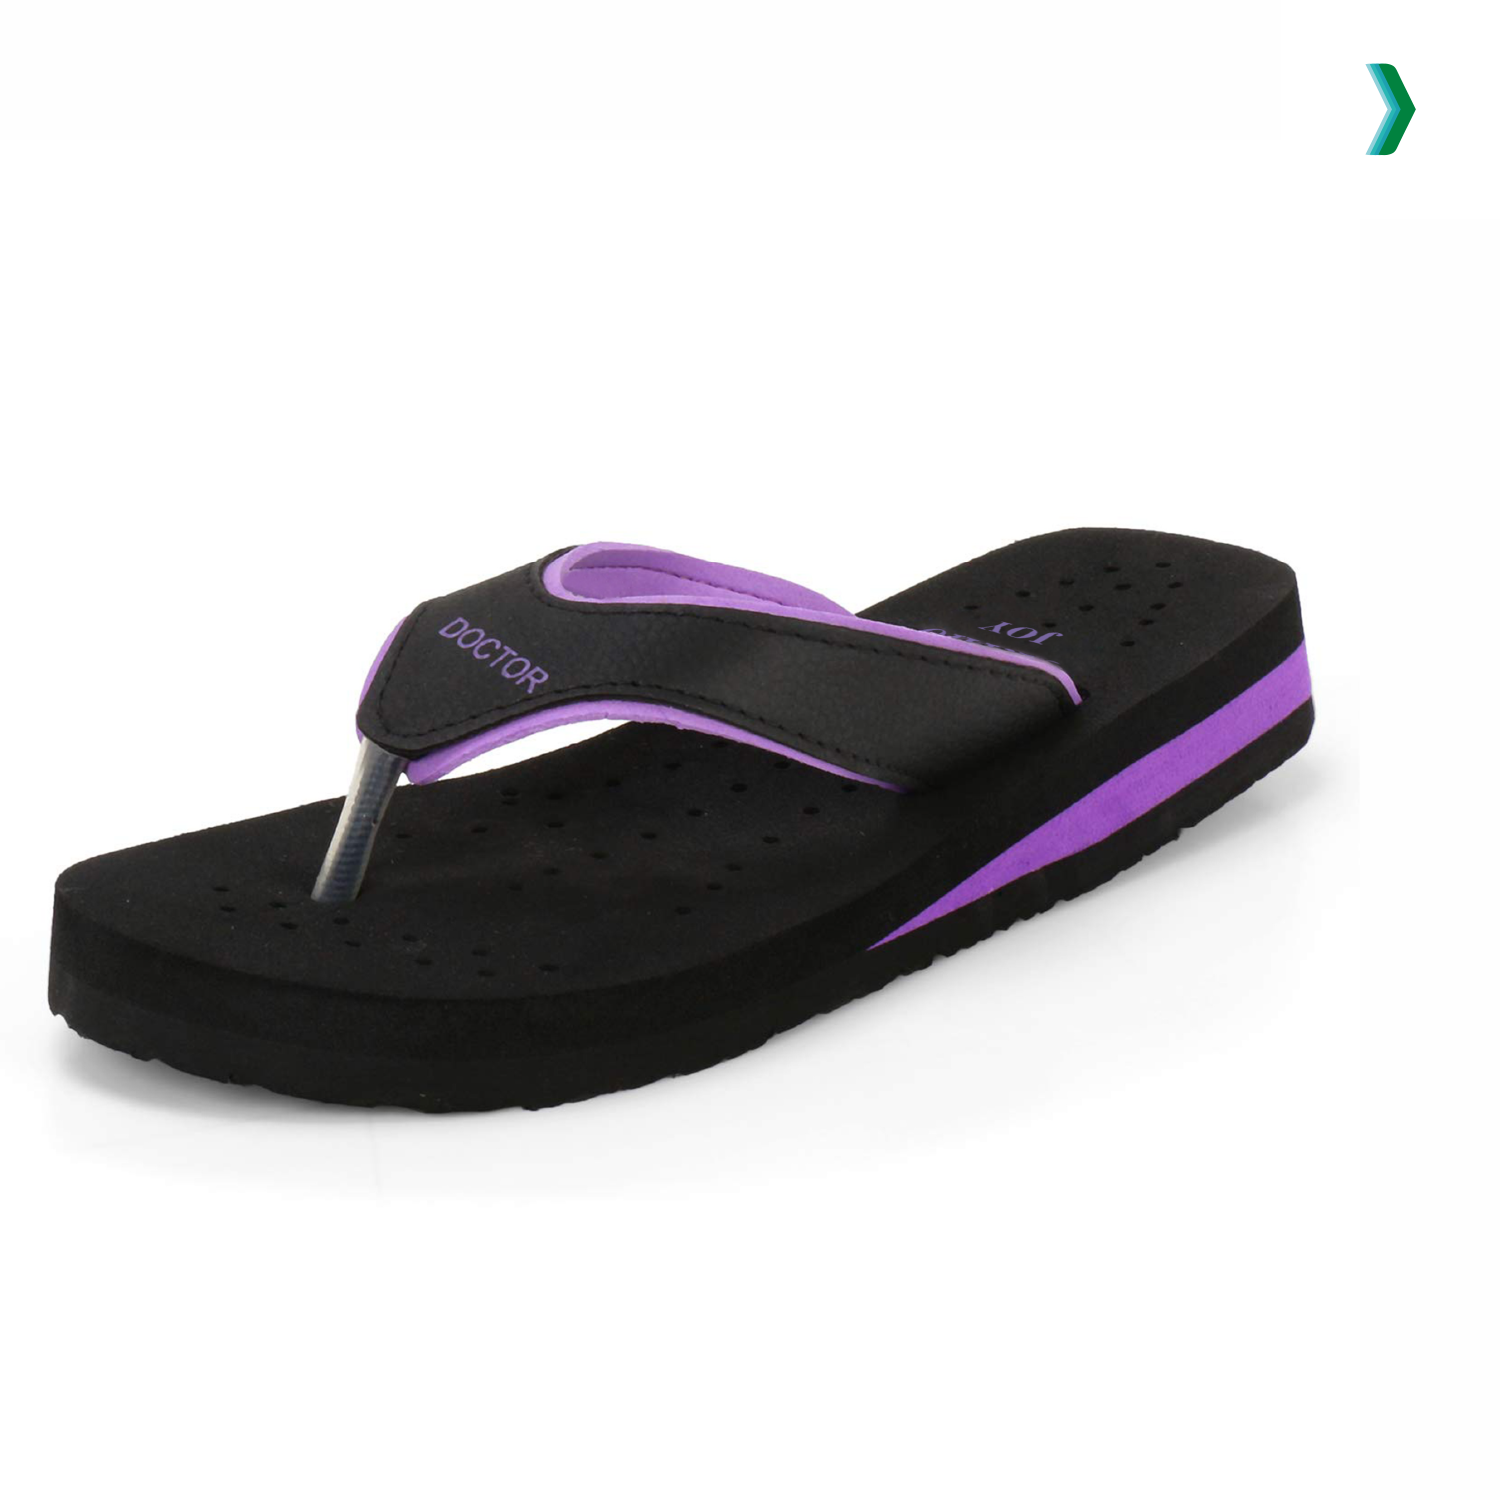 soft slippers for women, doctor chappal for ladies